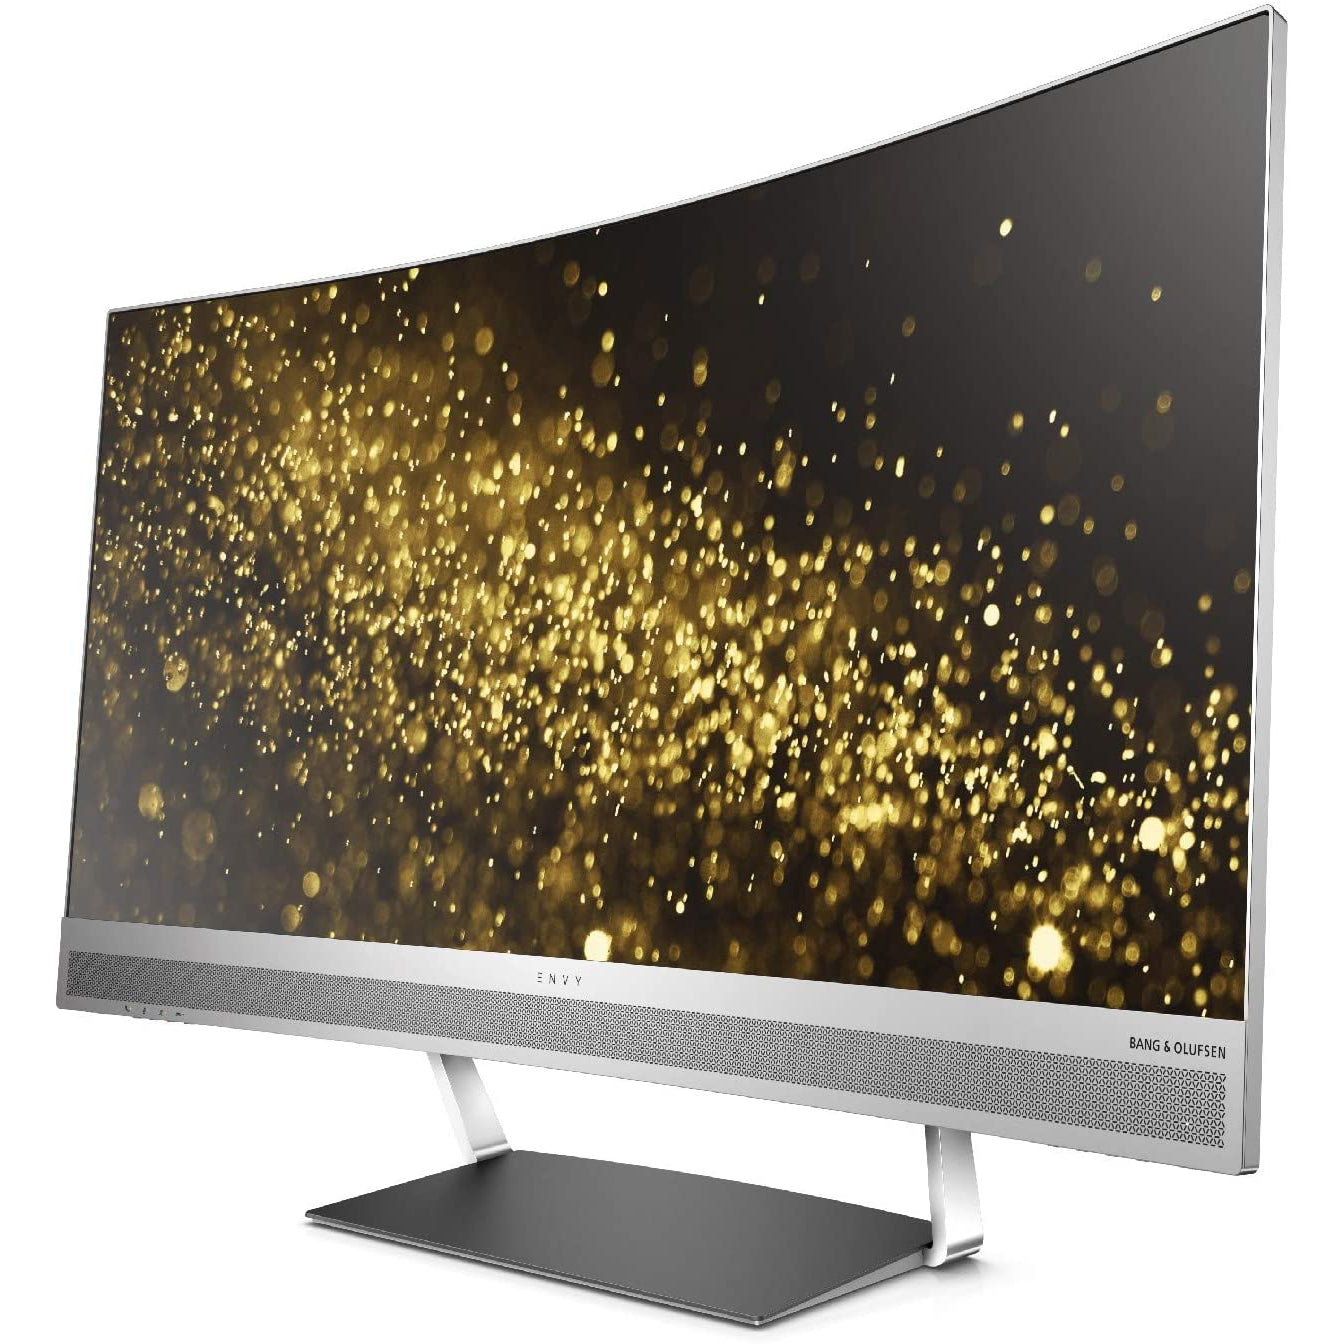 HP Envy 34 Curved Monitor 917539-004 - Silver